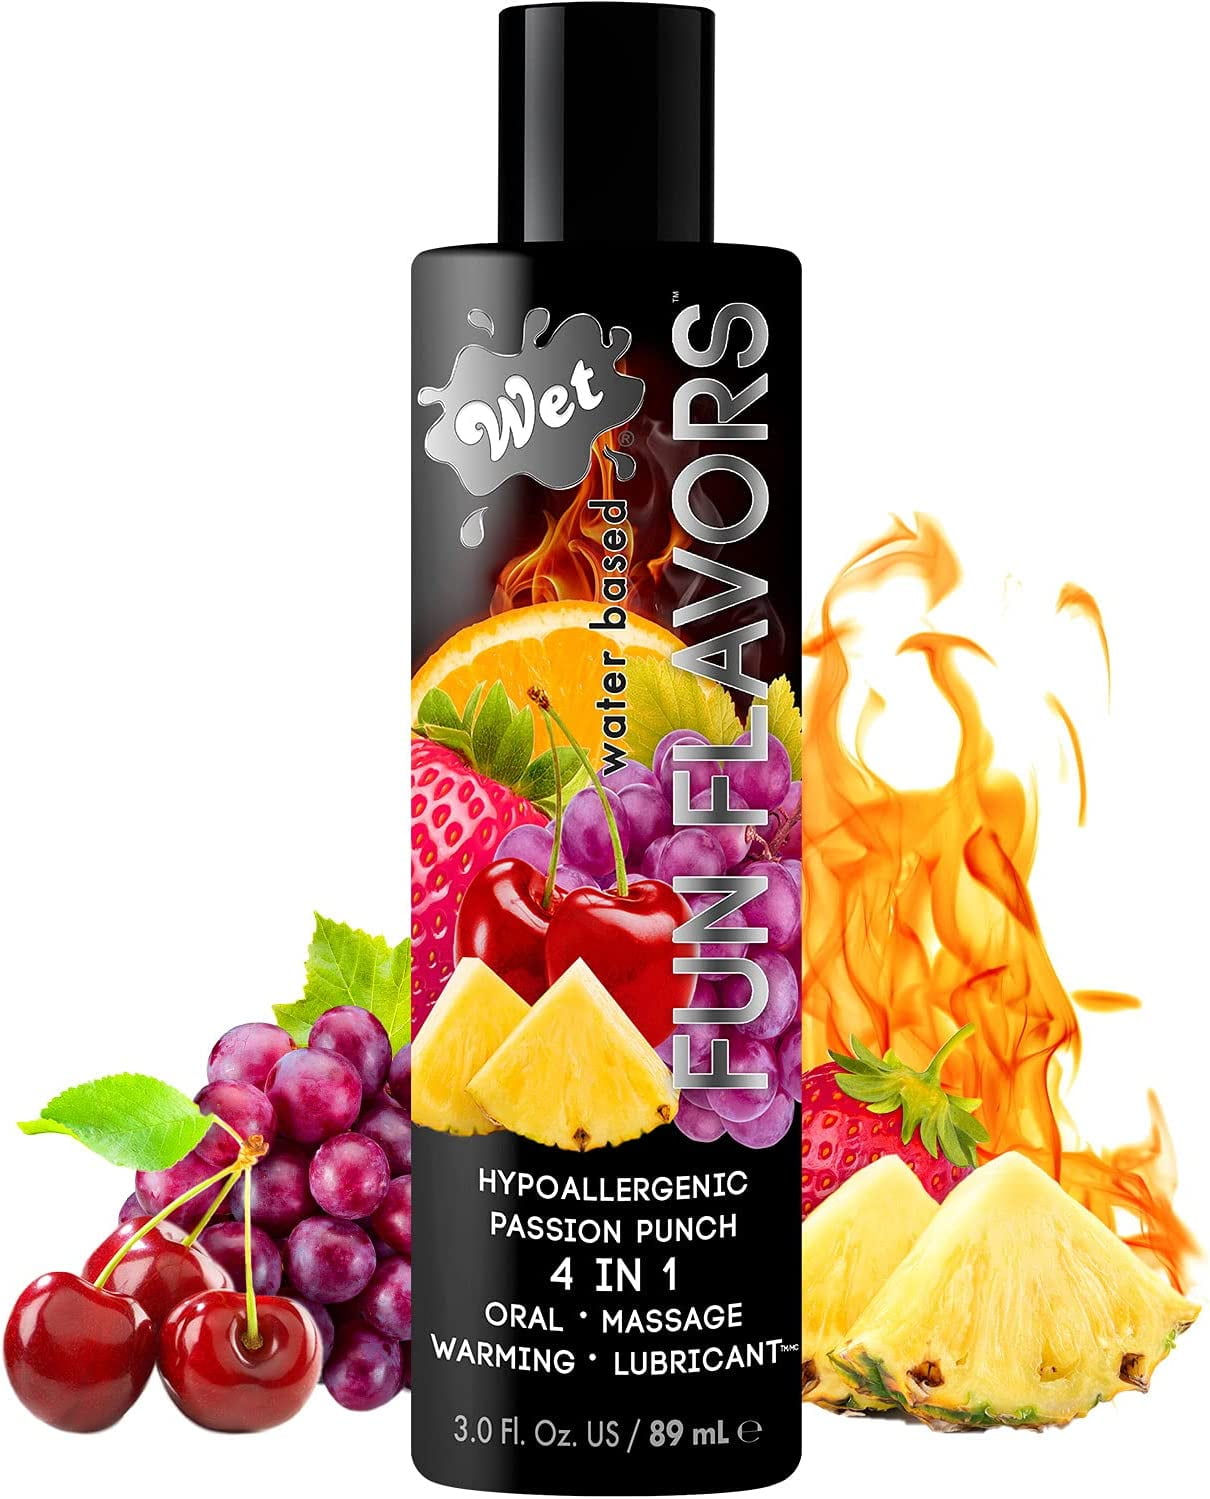 Wet Fun Flavors Passion Punch 4 in 1 Warming Flavored Edible Lube, Premium Personal Lubricant, 3 Oz, Men, Women and Couples, Ideal for Foreplay and Massage, Paraben Free, Gluten, Stain, and Sugar picture